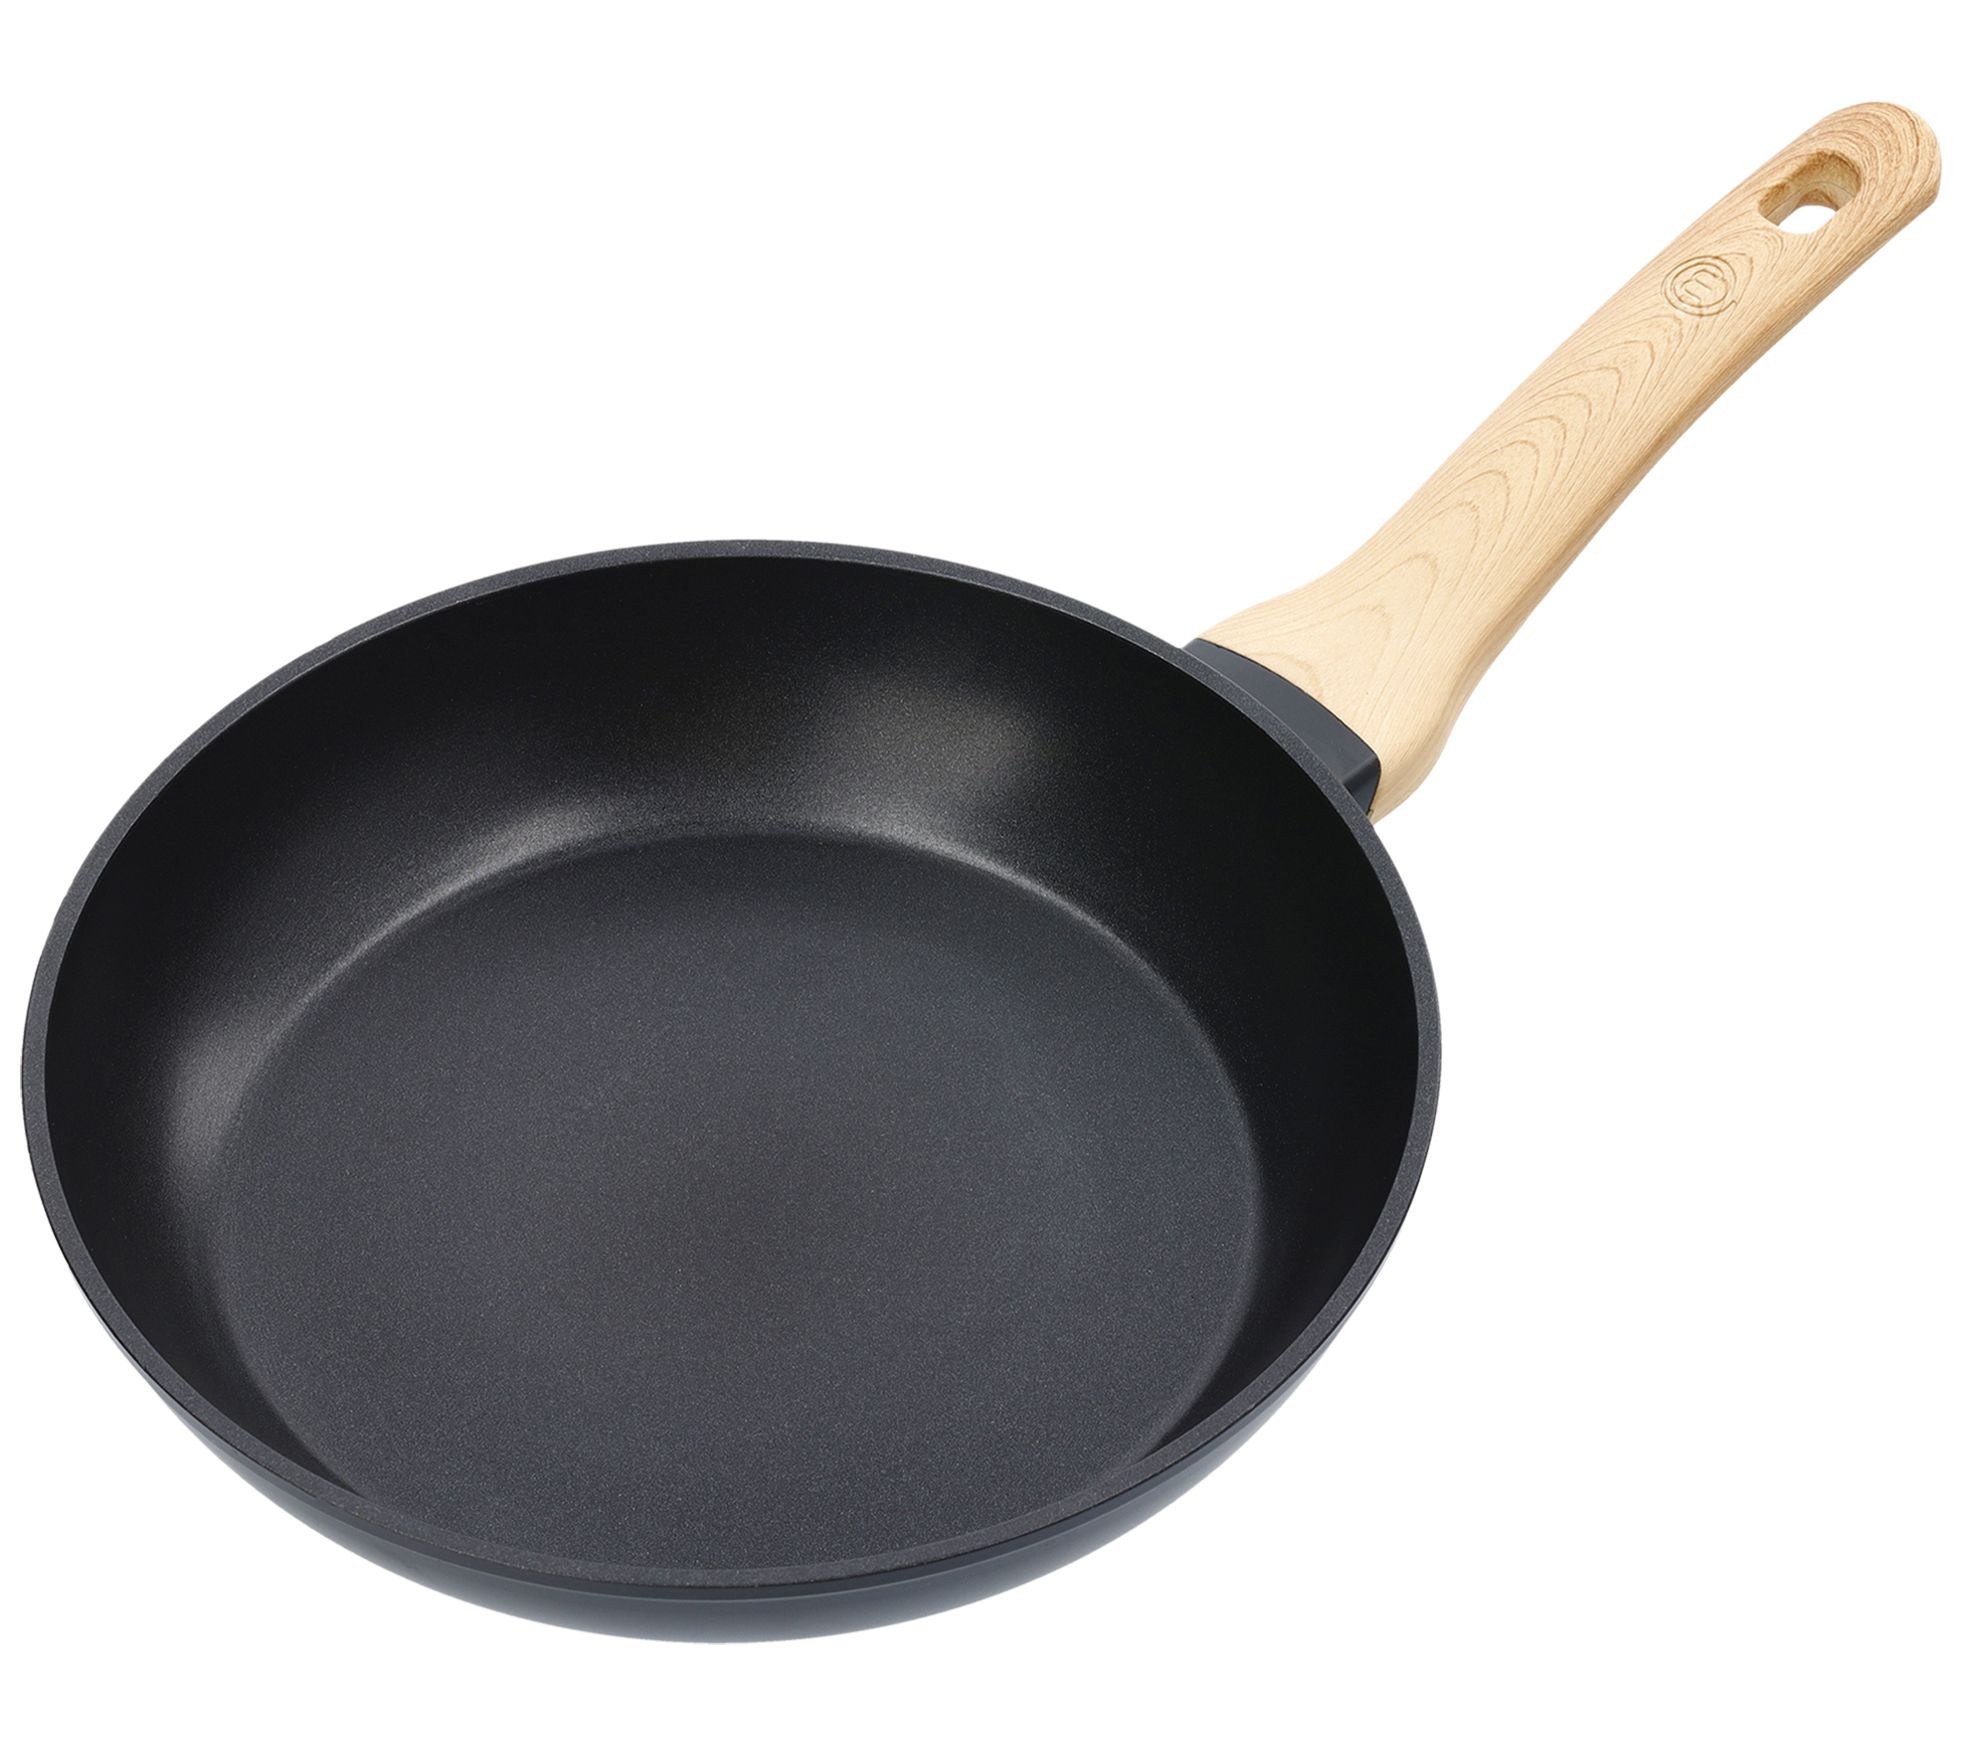 Masterchef Frying Pan with Soft-Touch Bakelite Handle 10